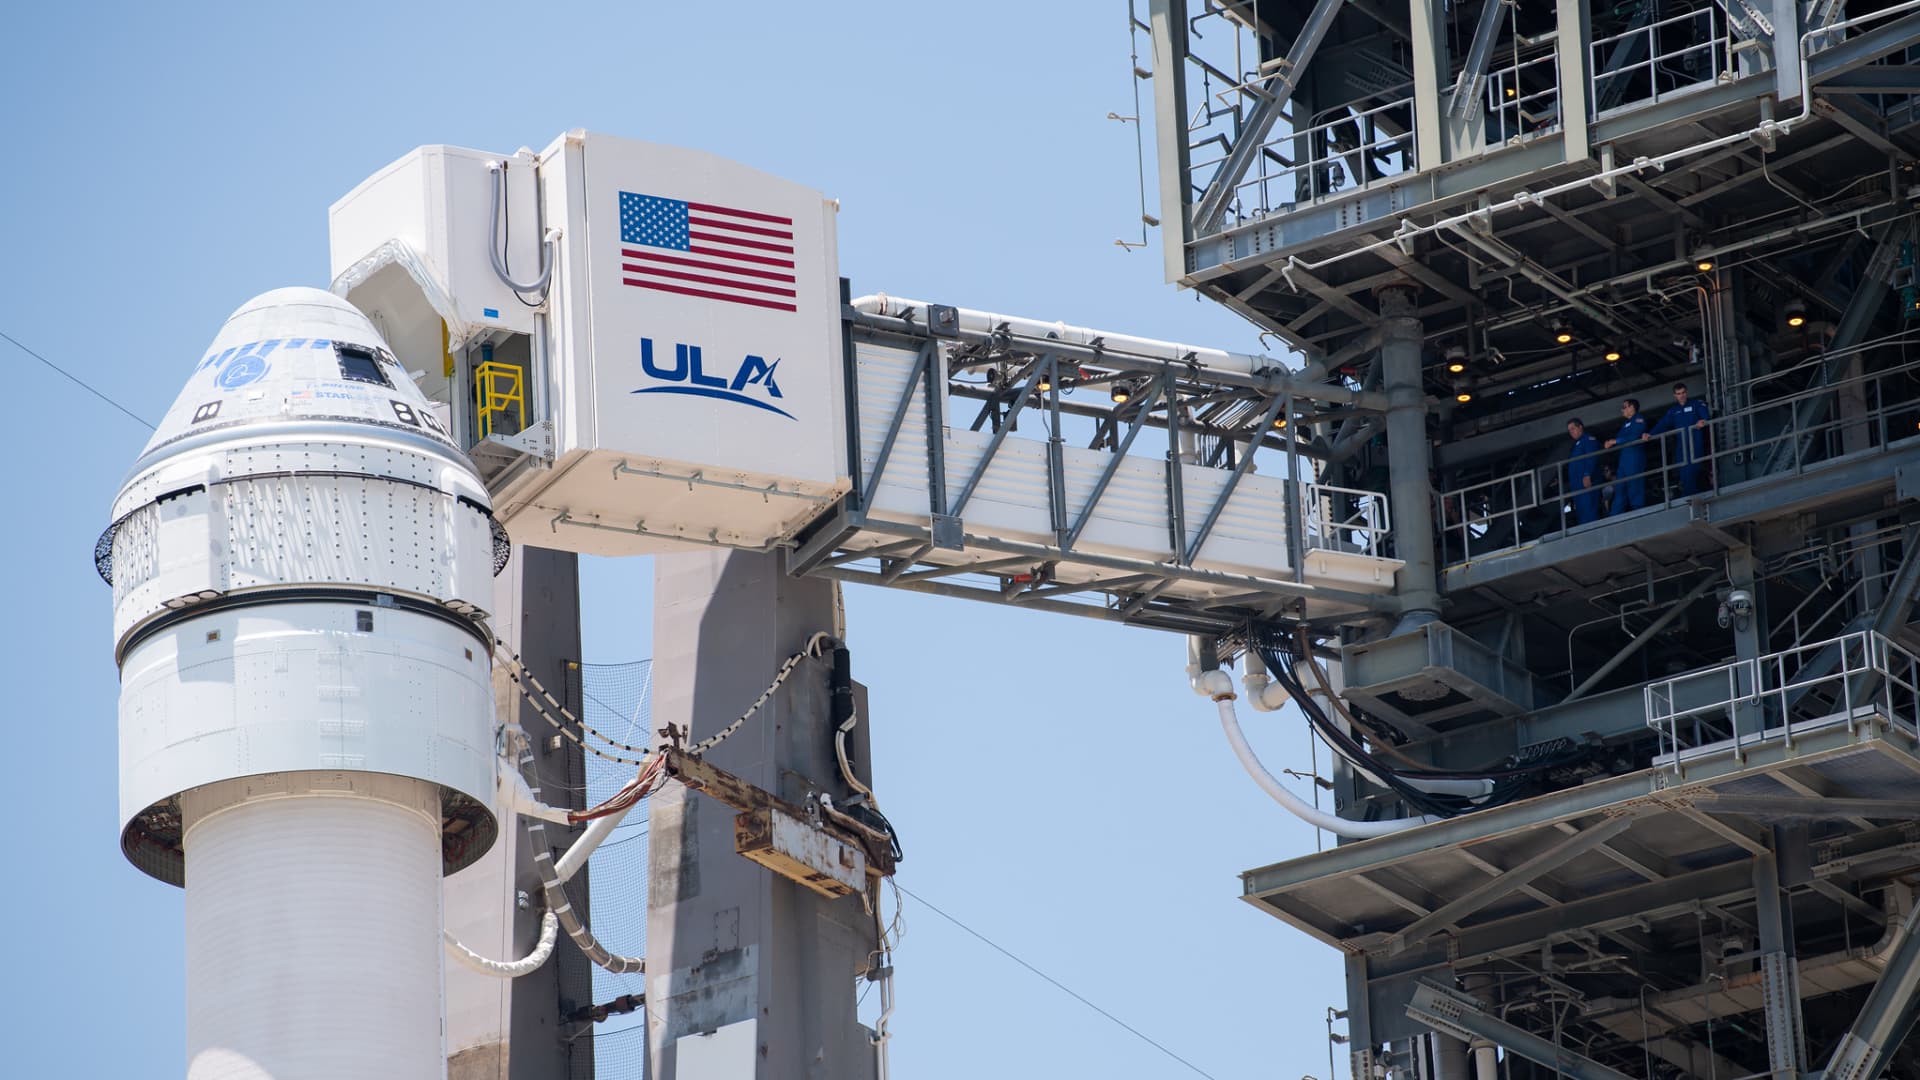 The crew access arm of Launch Complex-41 swings into position for Boeing's Starliner spacecraft ahead of the launch of the OFT-2 mission, scheduled for May 19, 2022.